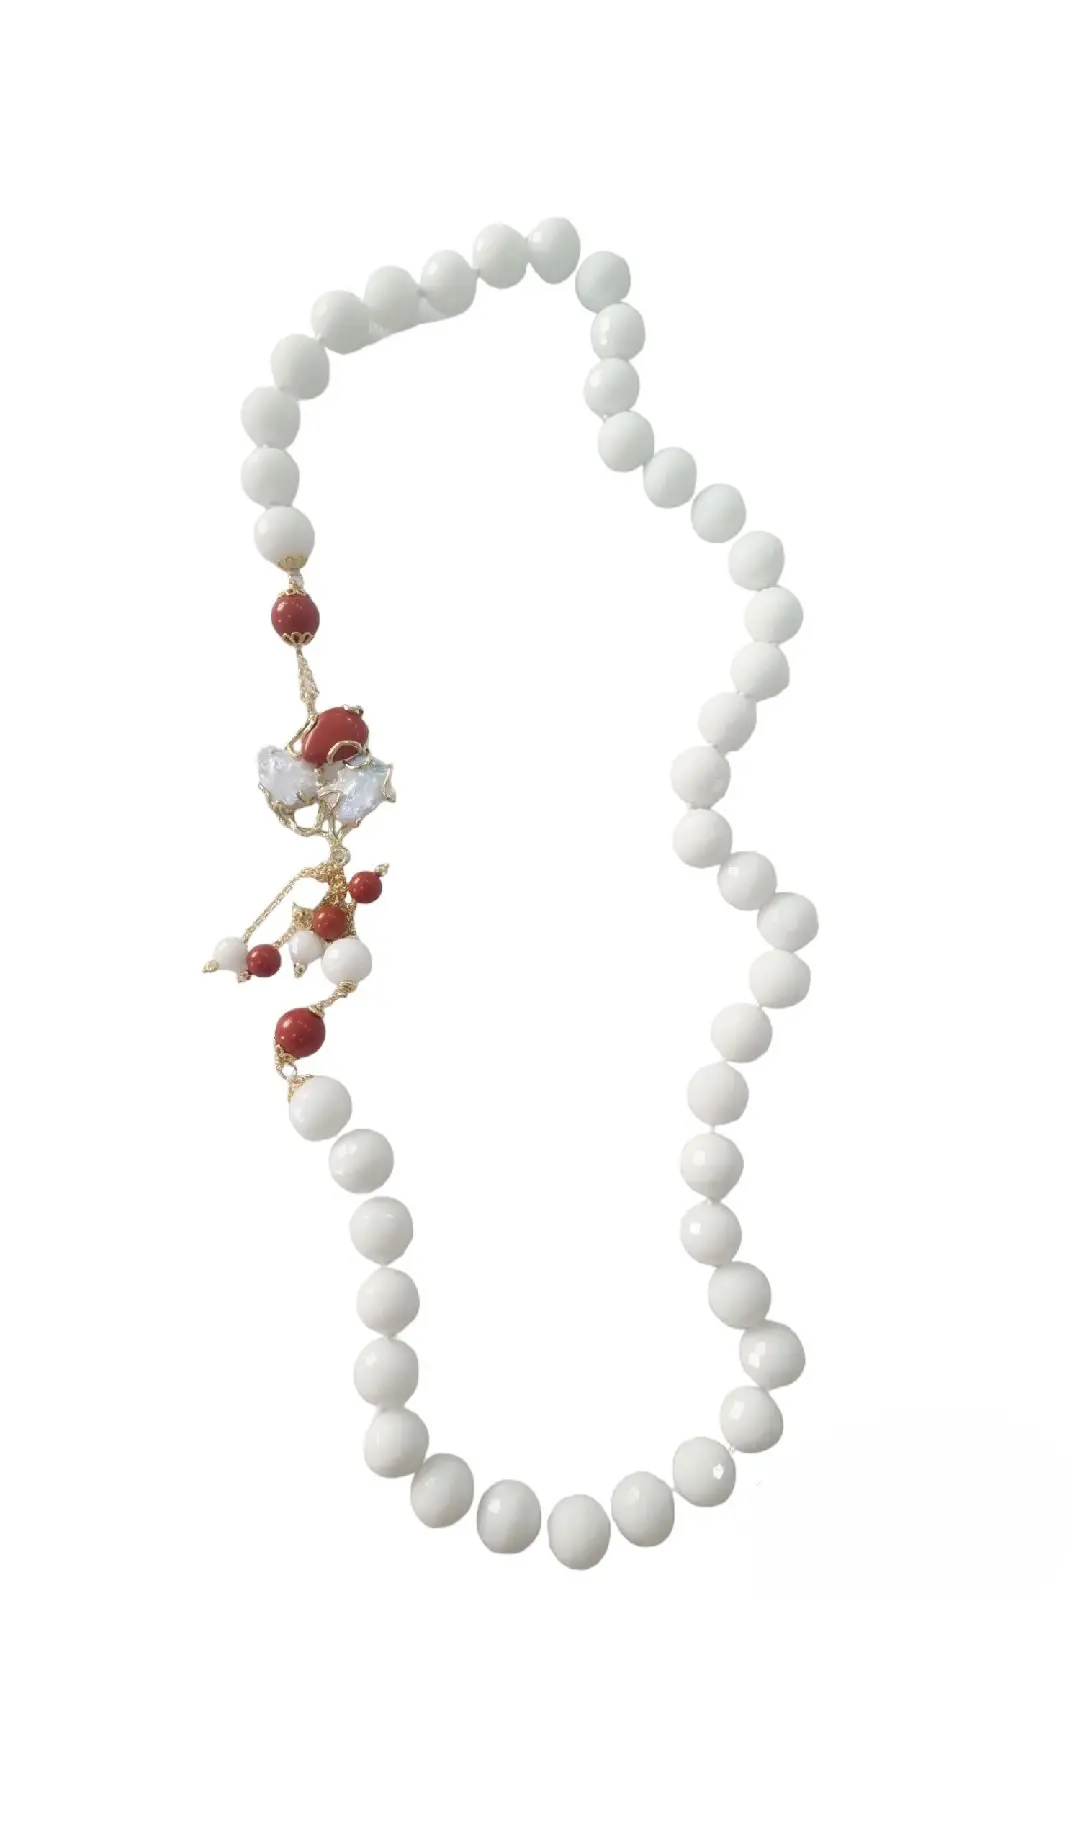 Necklace made with white agate, Majorca pearls and freshwater pearls. golden brass elements. Length 80cm